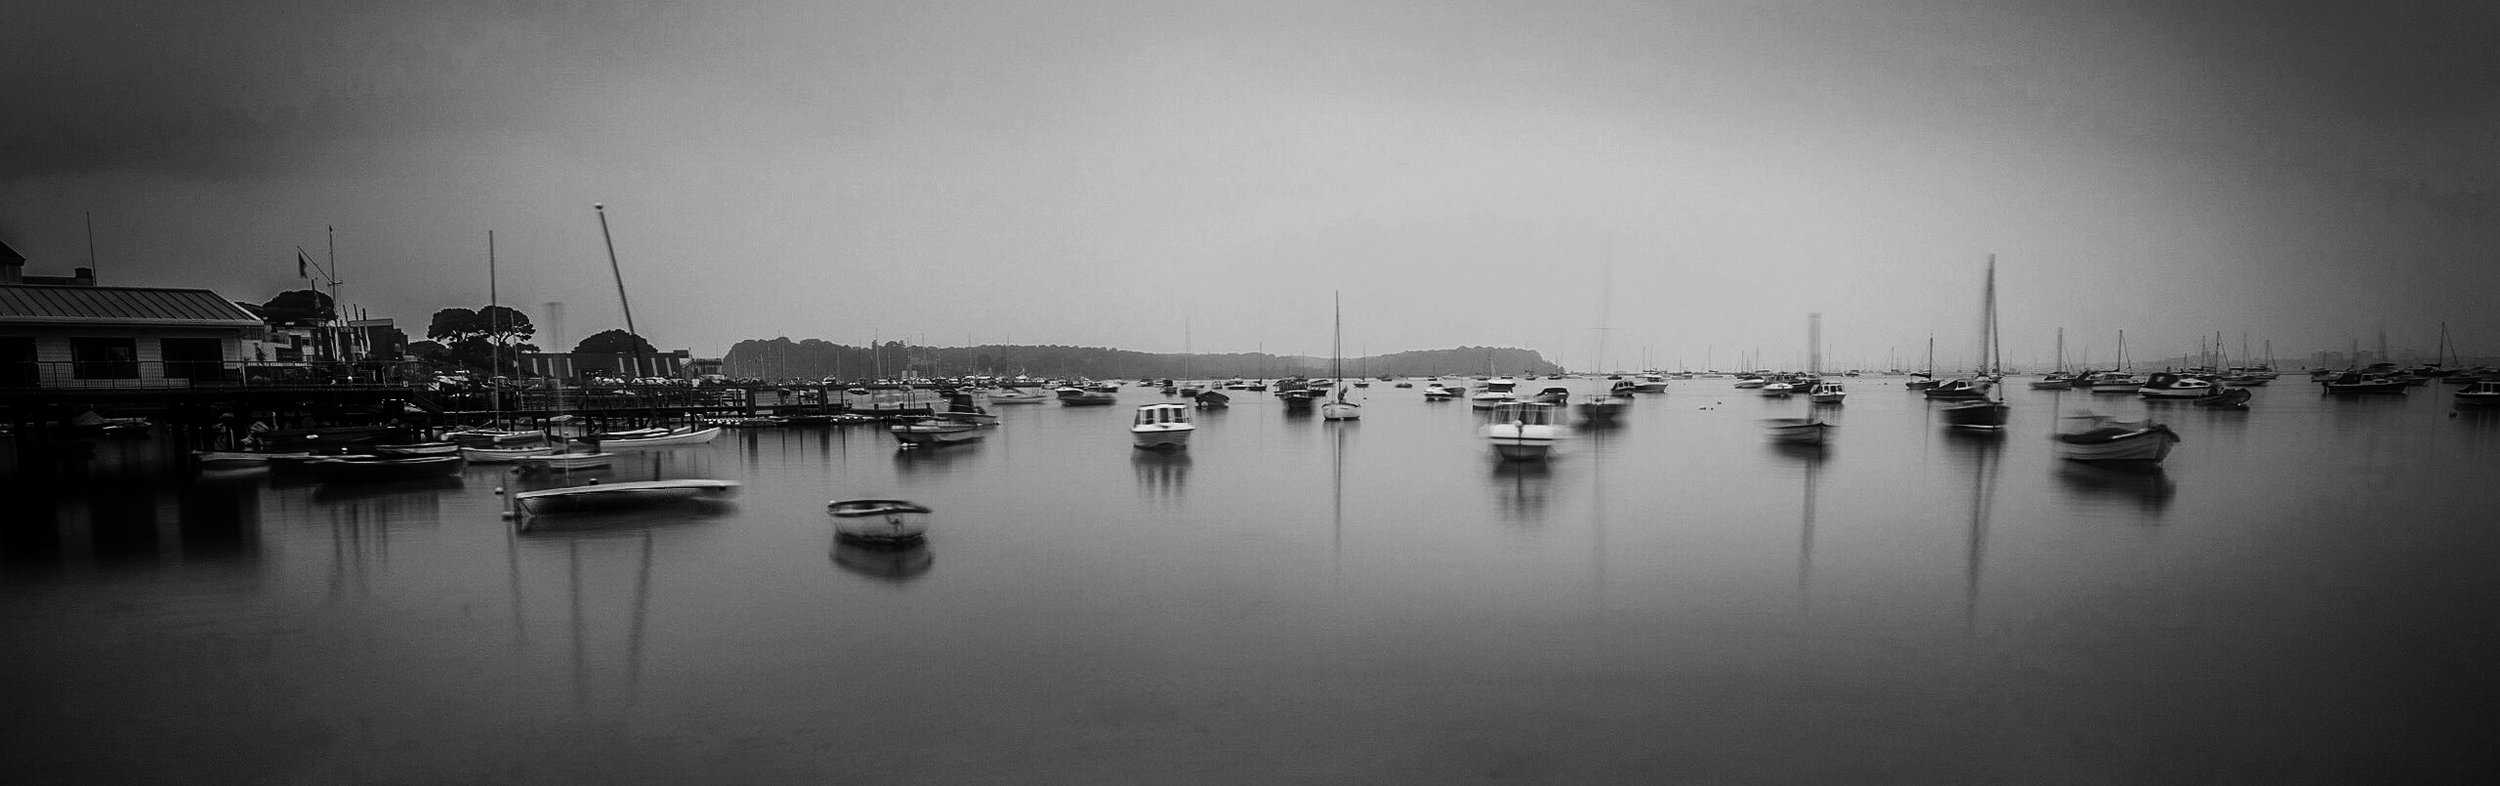  Finally the black and white picture of Sandbanks 